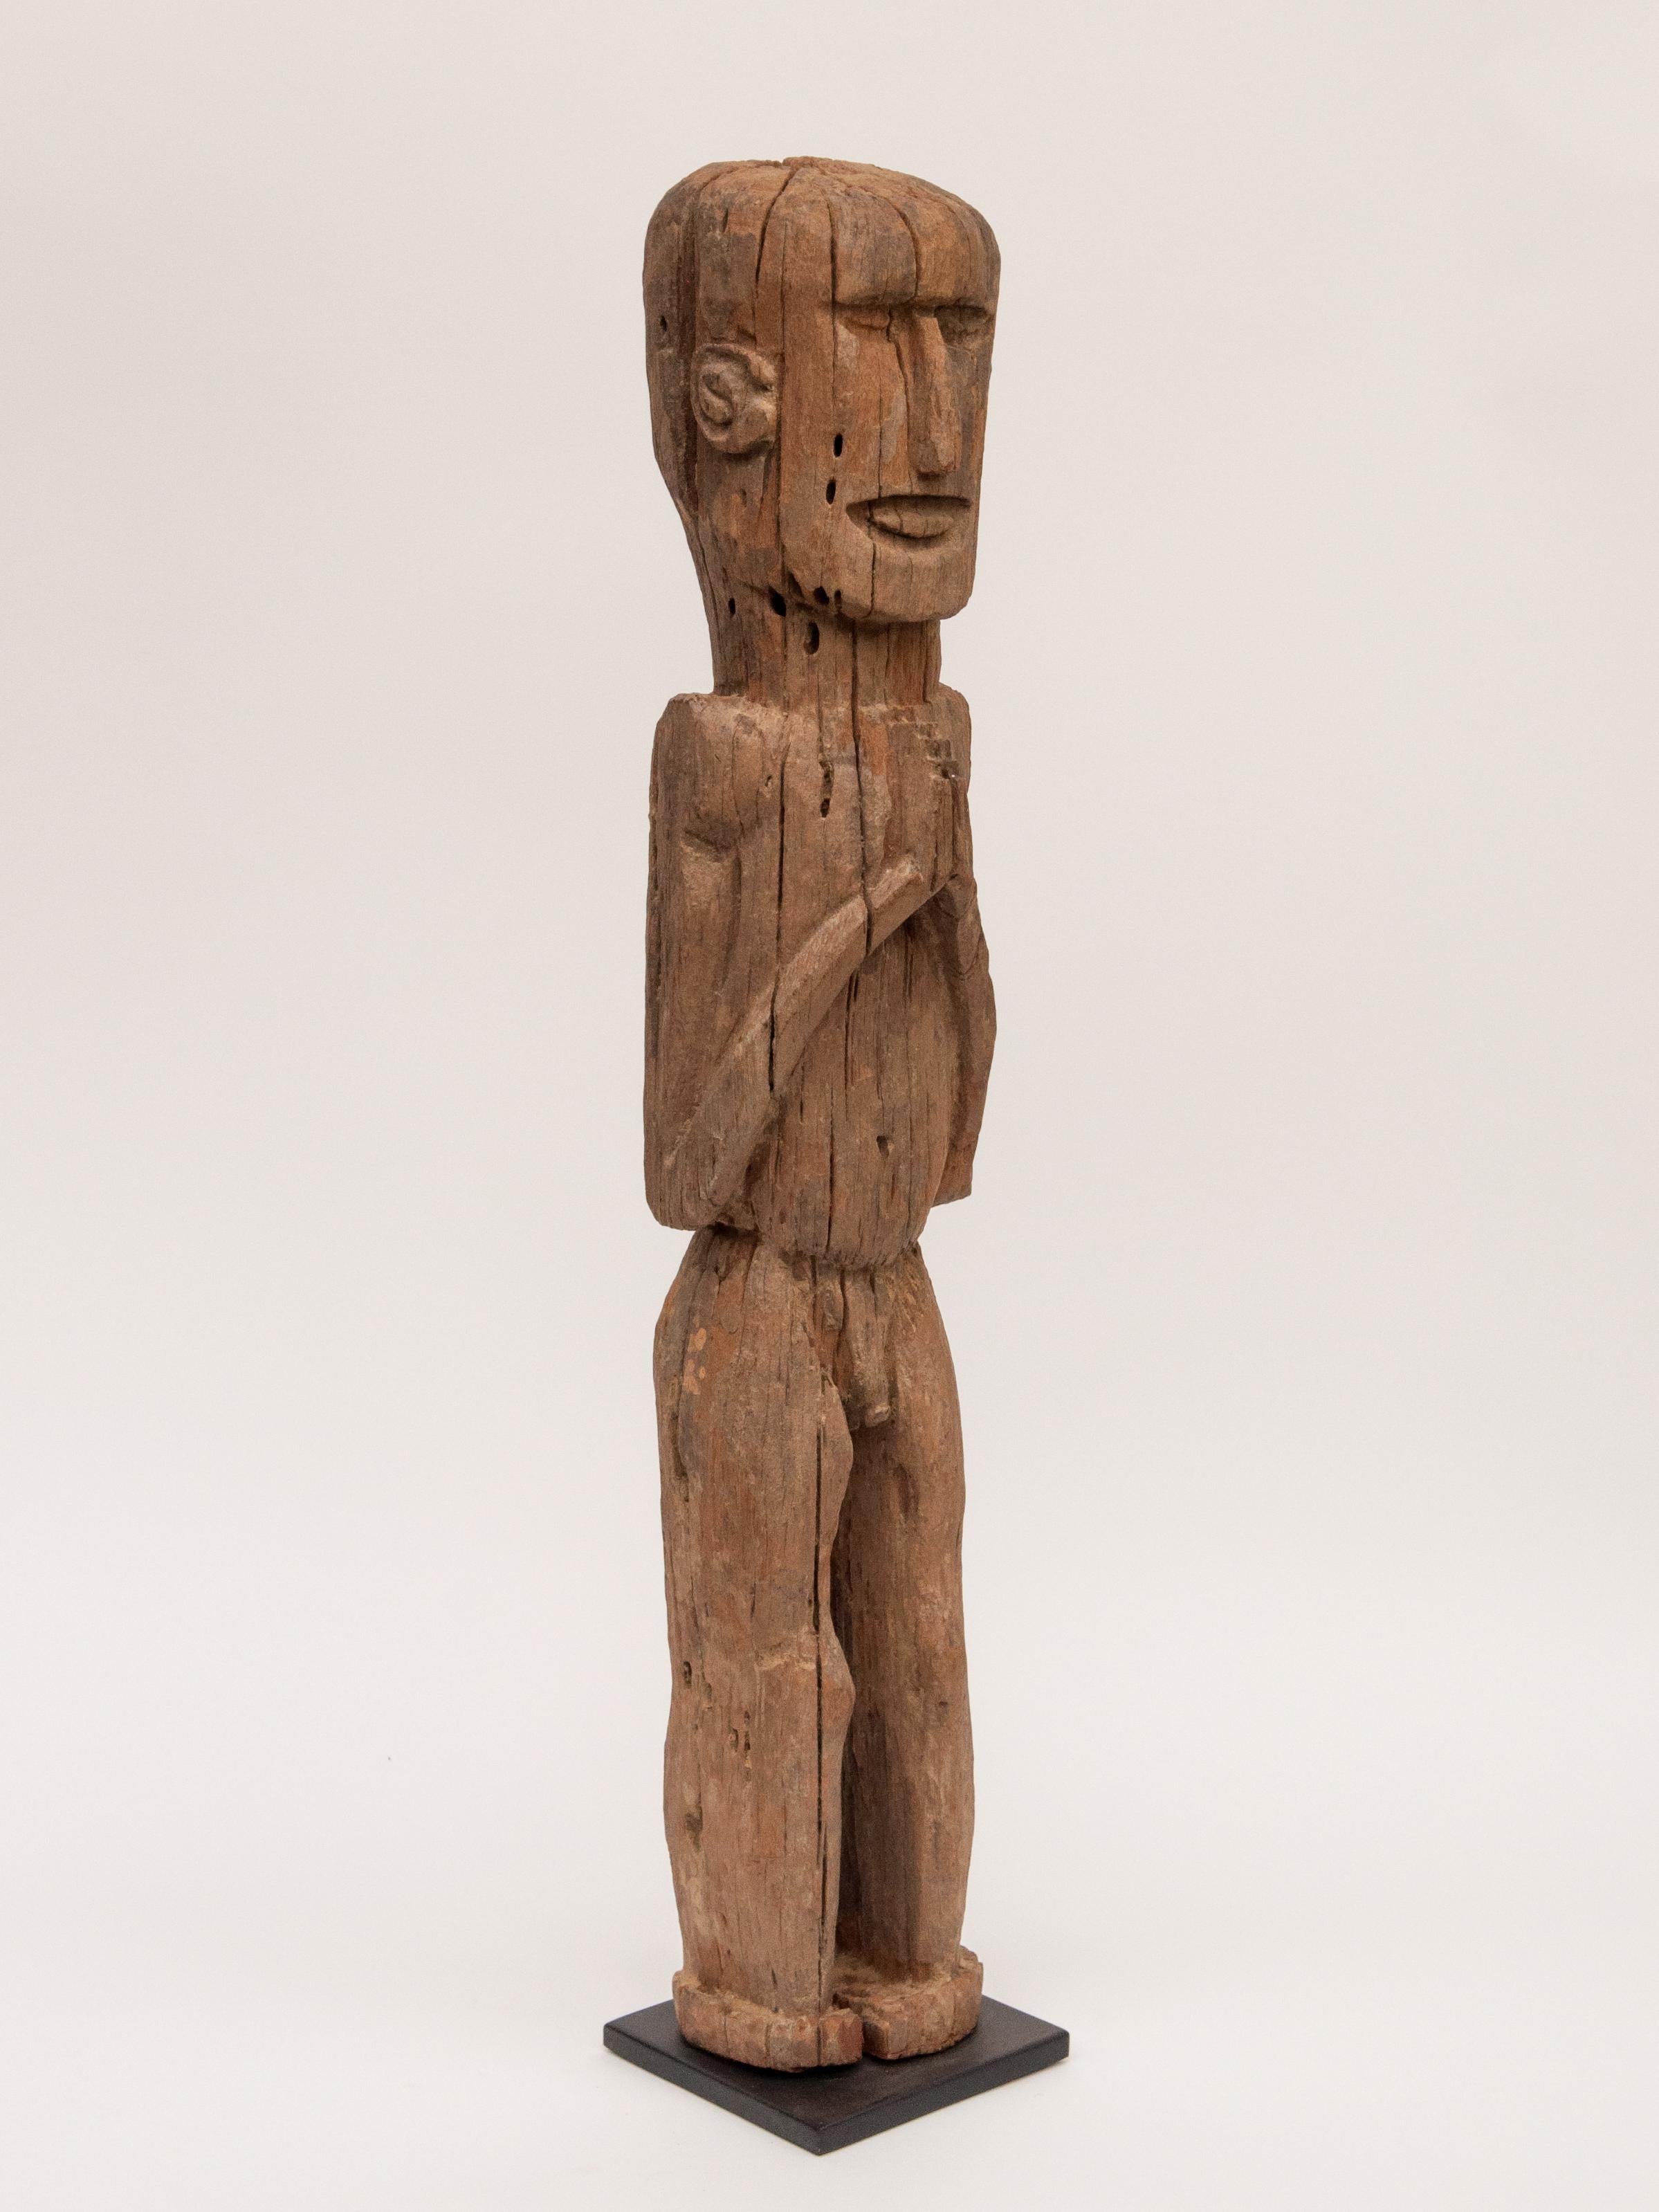 Wooden tribal male statue from West Nepal, early to mid-20th century. Mounted on a metal plate.
This wooden figure comes from West Nepal, most probably from the area of the Karnali river system. There is some mystery to these sculptures, which are